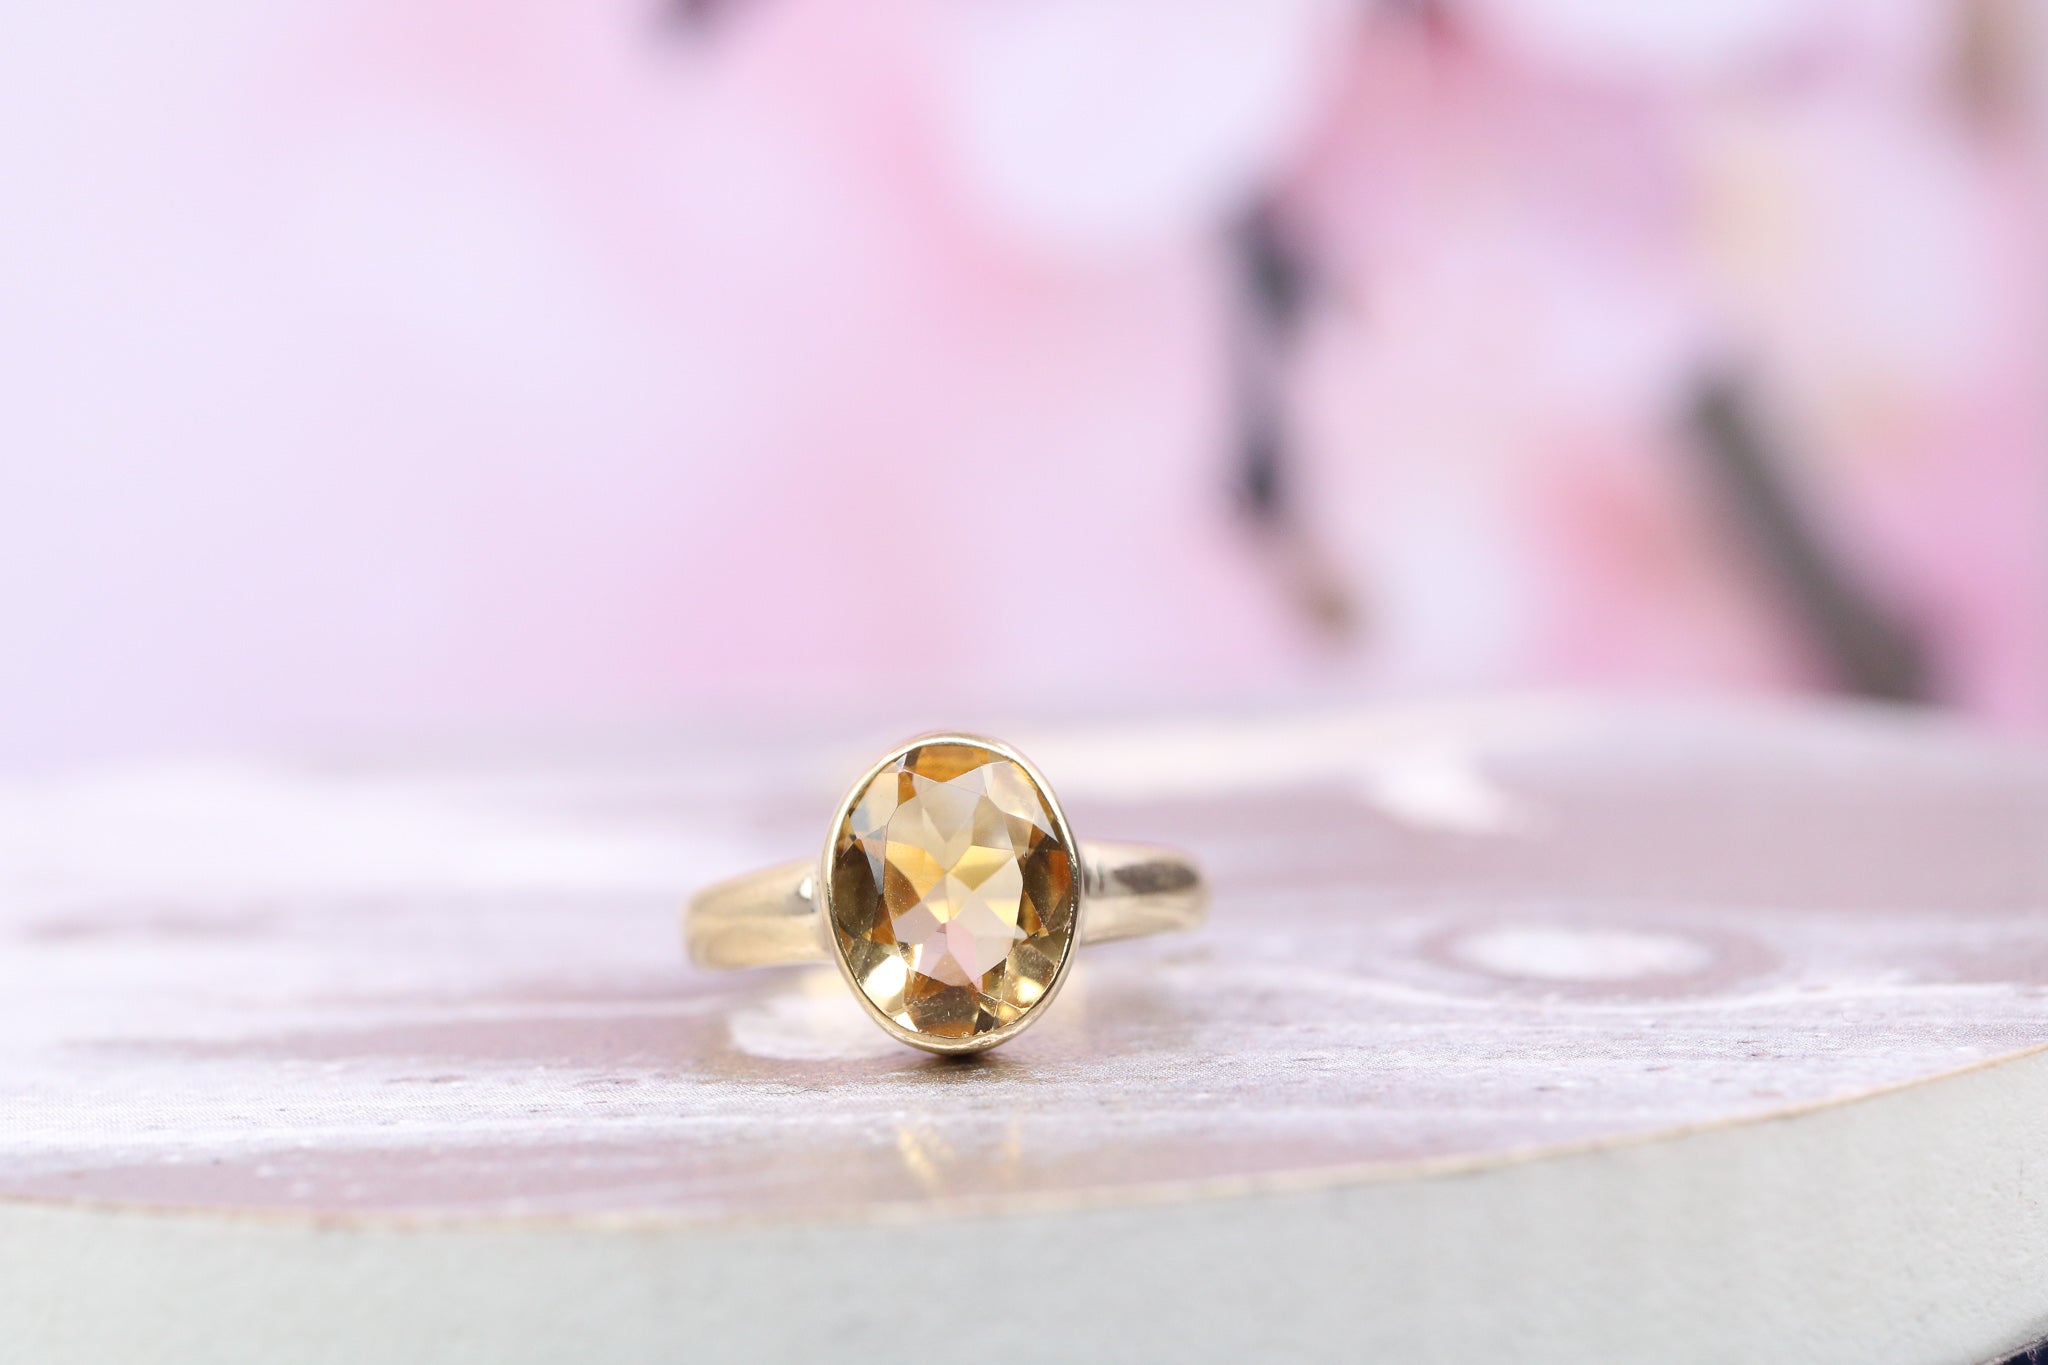 9ct Yellow Gold & Citrine Ring - HJ2687 - Hallmark Jewellers Formby & The Jewellers Bench Widnes